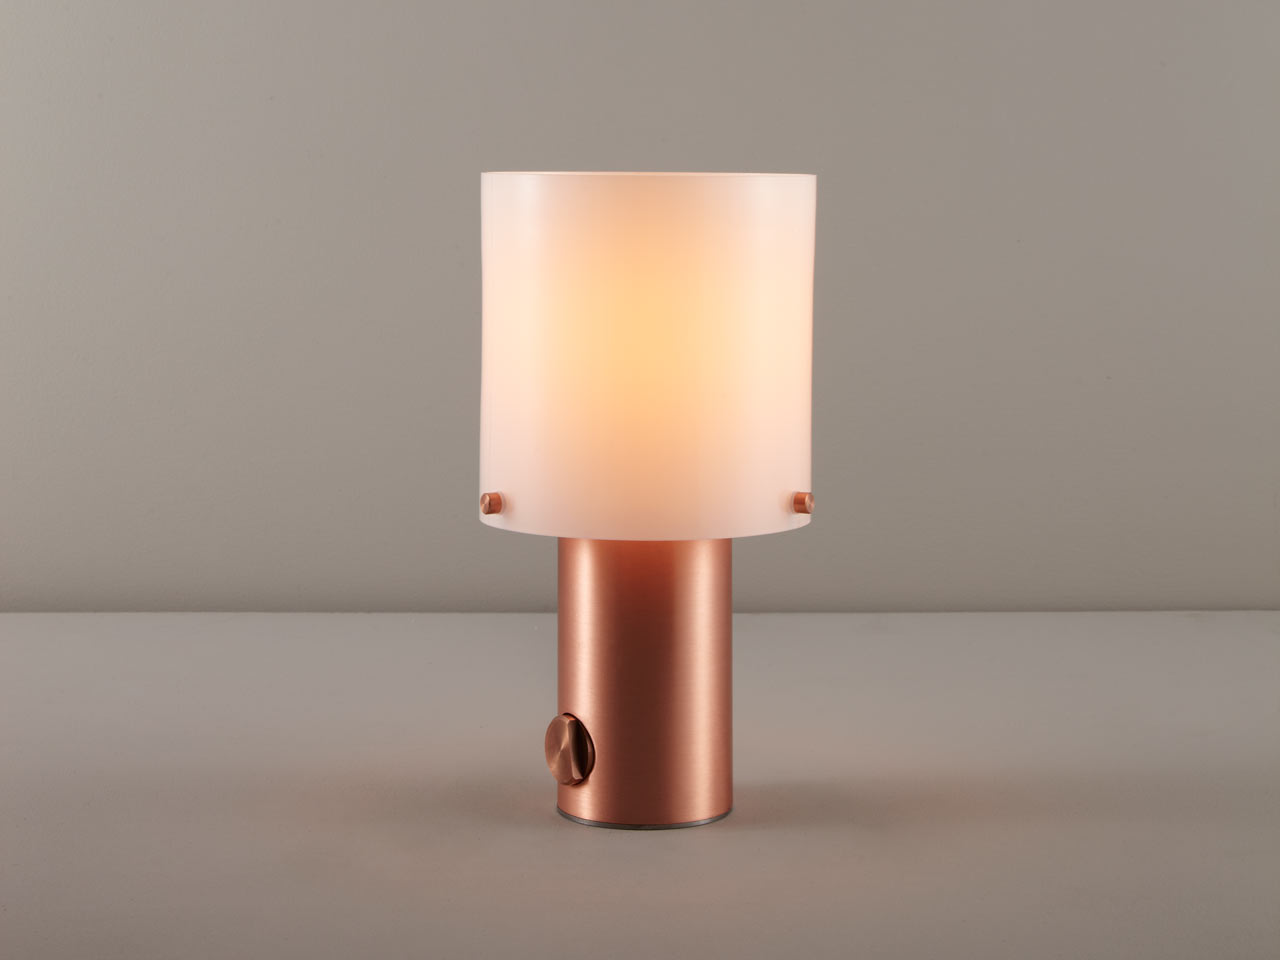 This gorgeous table lamp is called Walter and brings gorgeous vintage aethetics and a trendy metallic finish to your space